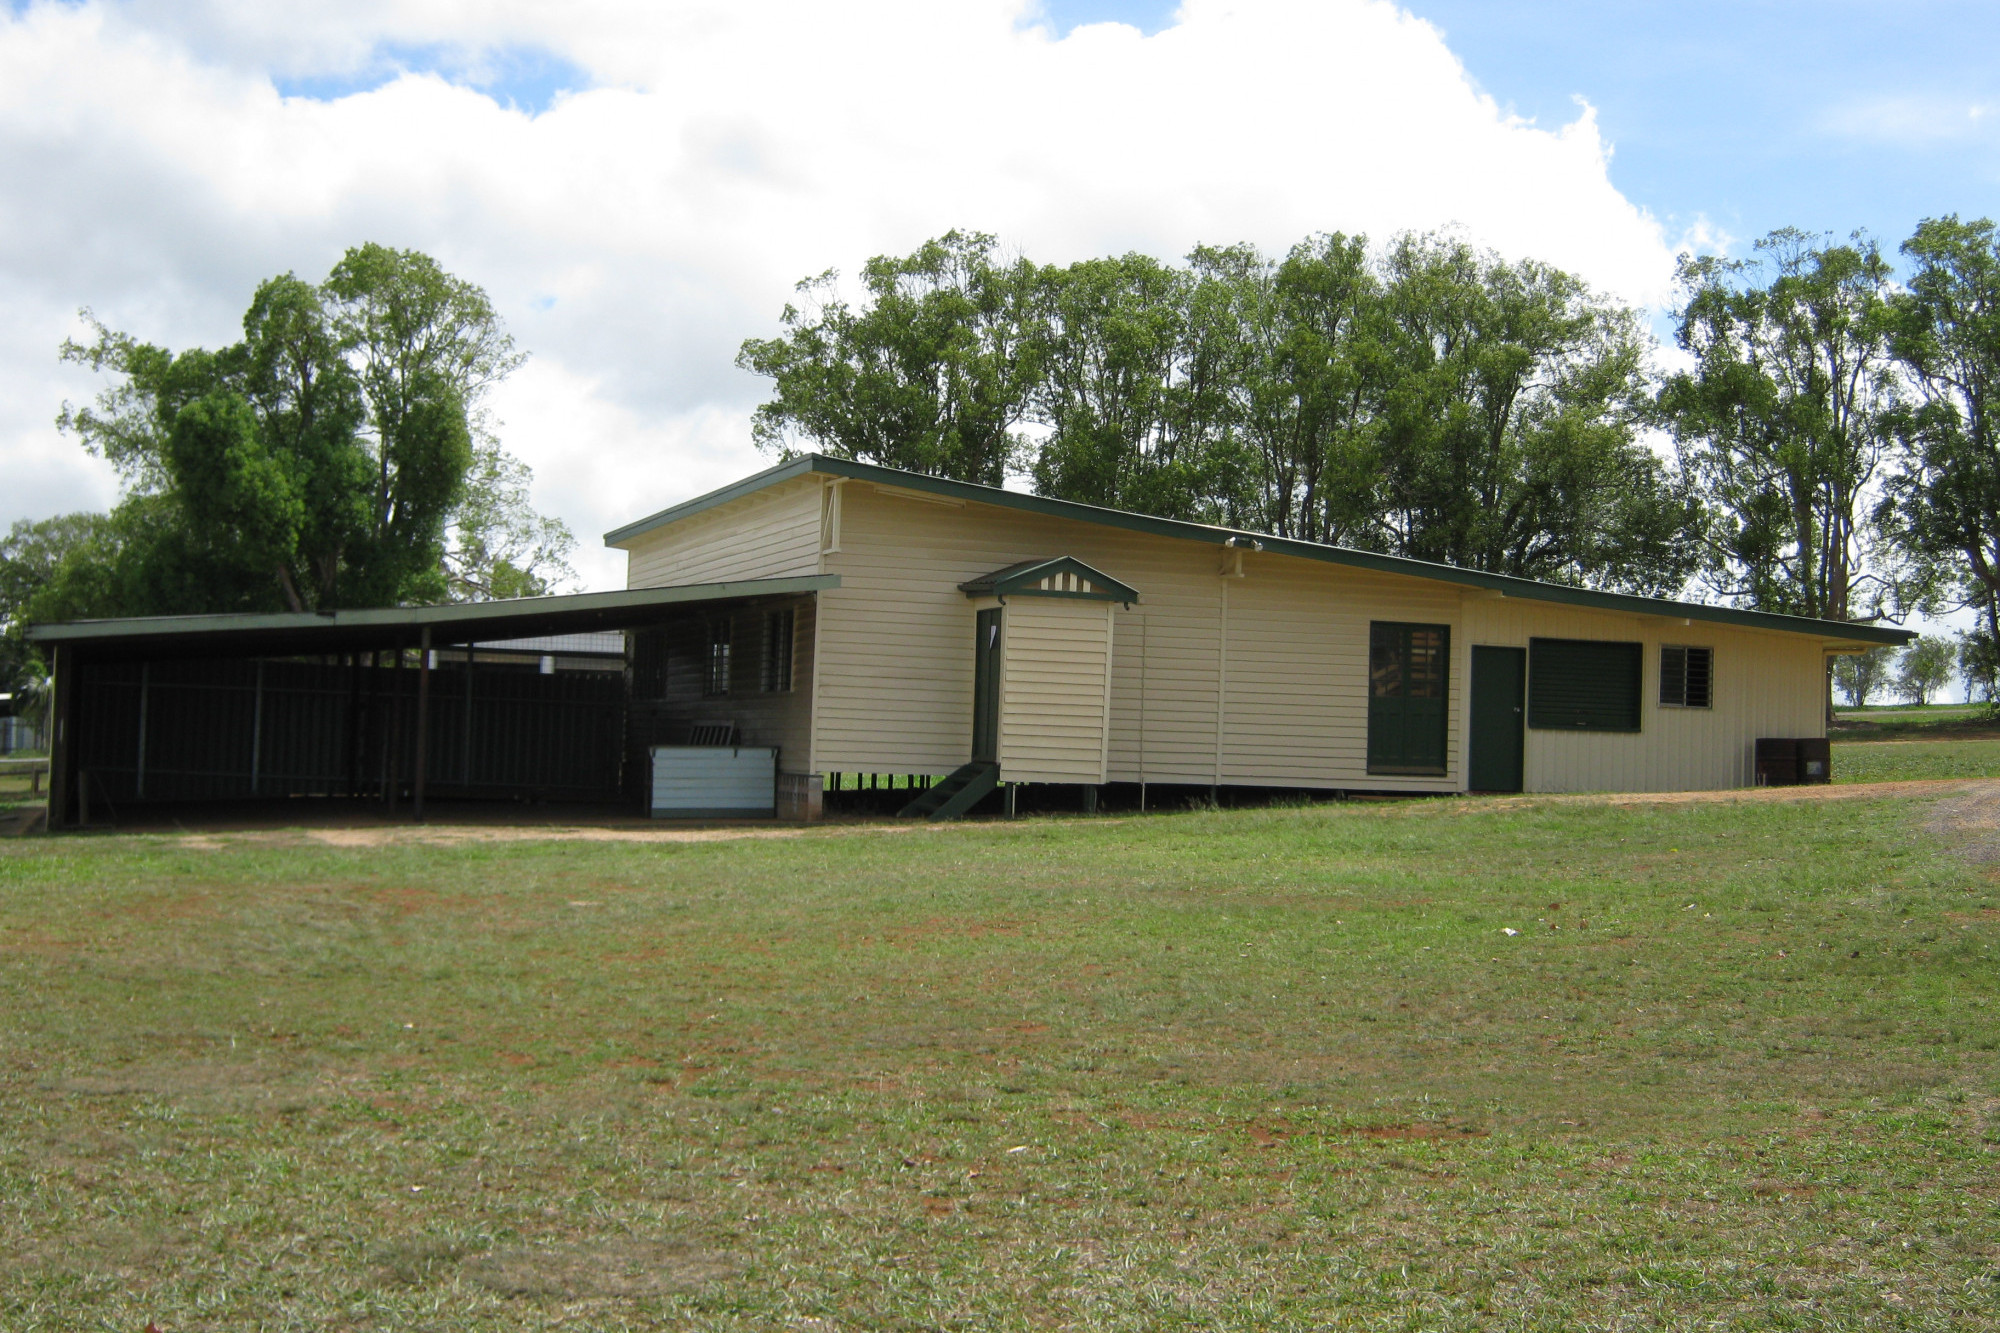 The Yungaburra memorial Hall which has been used once in the past 12 months